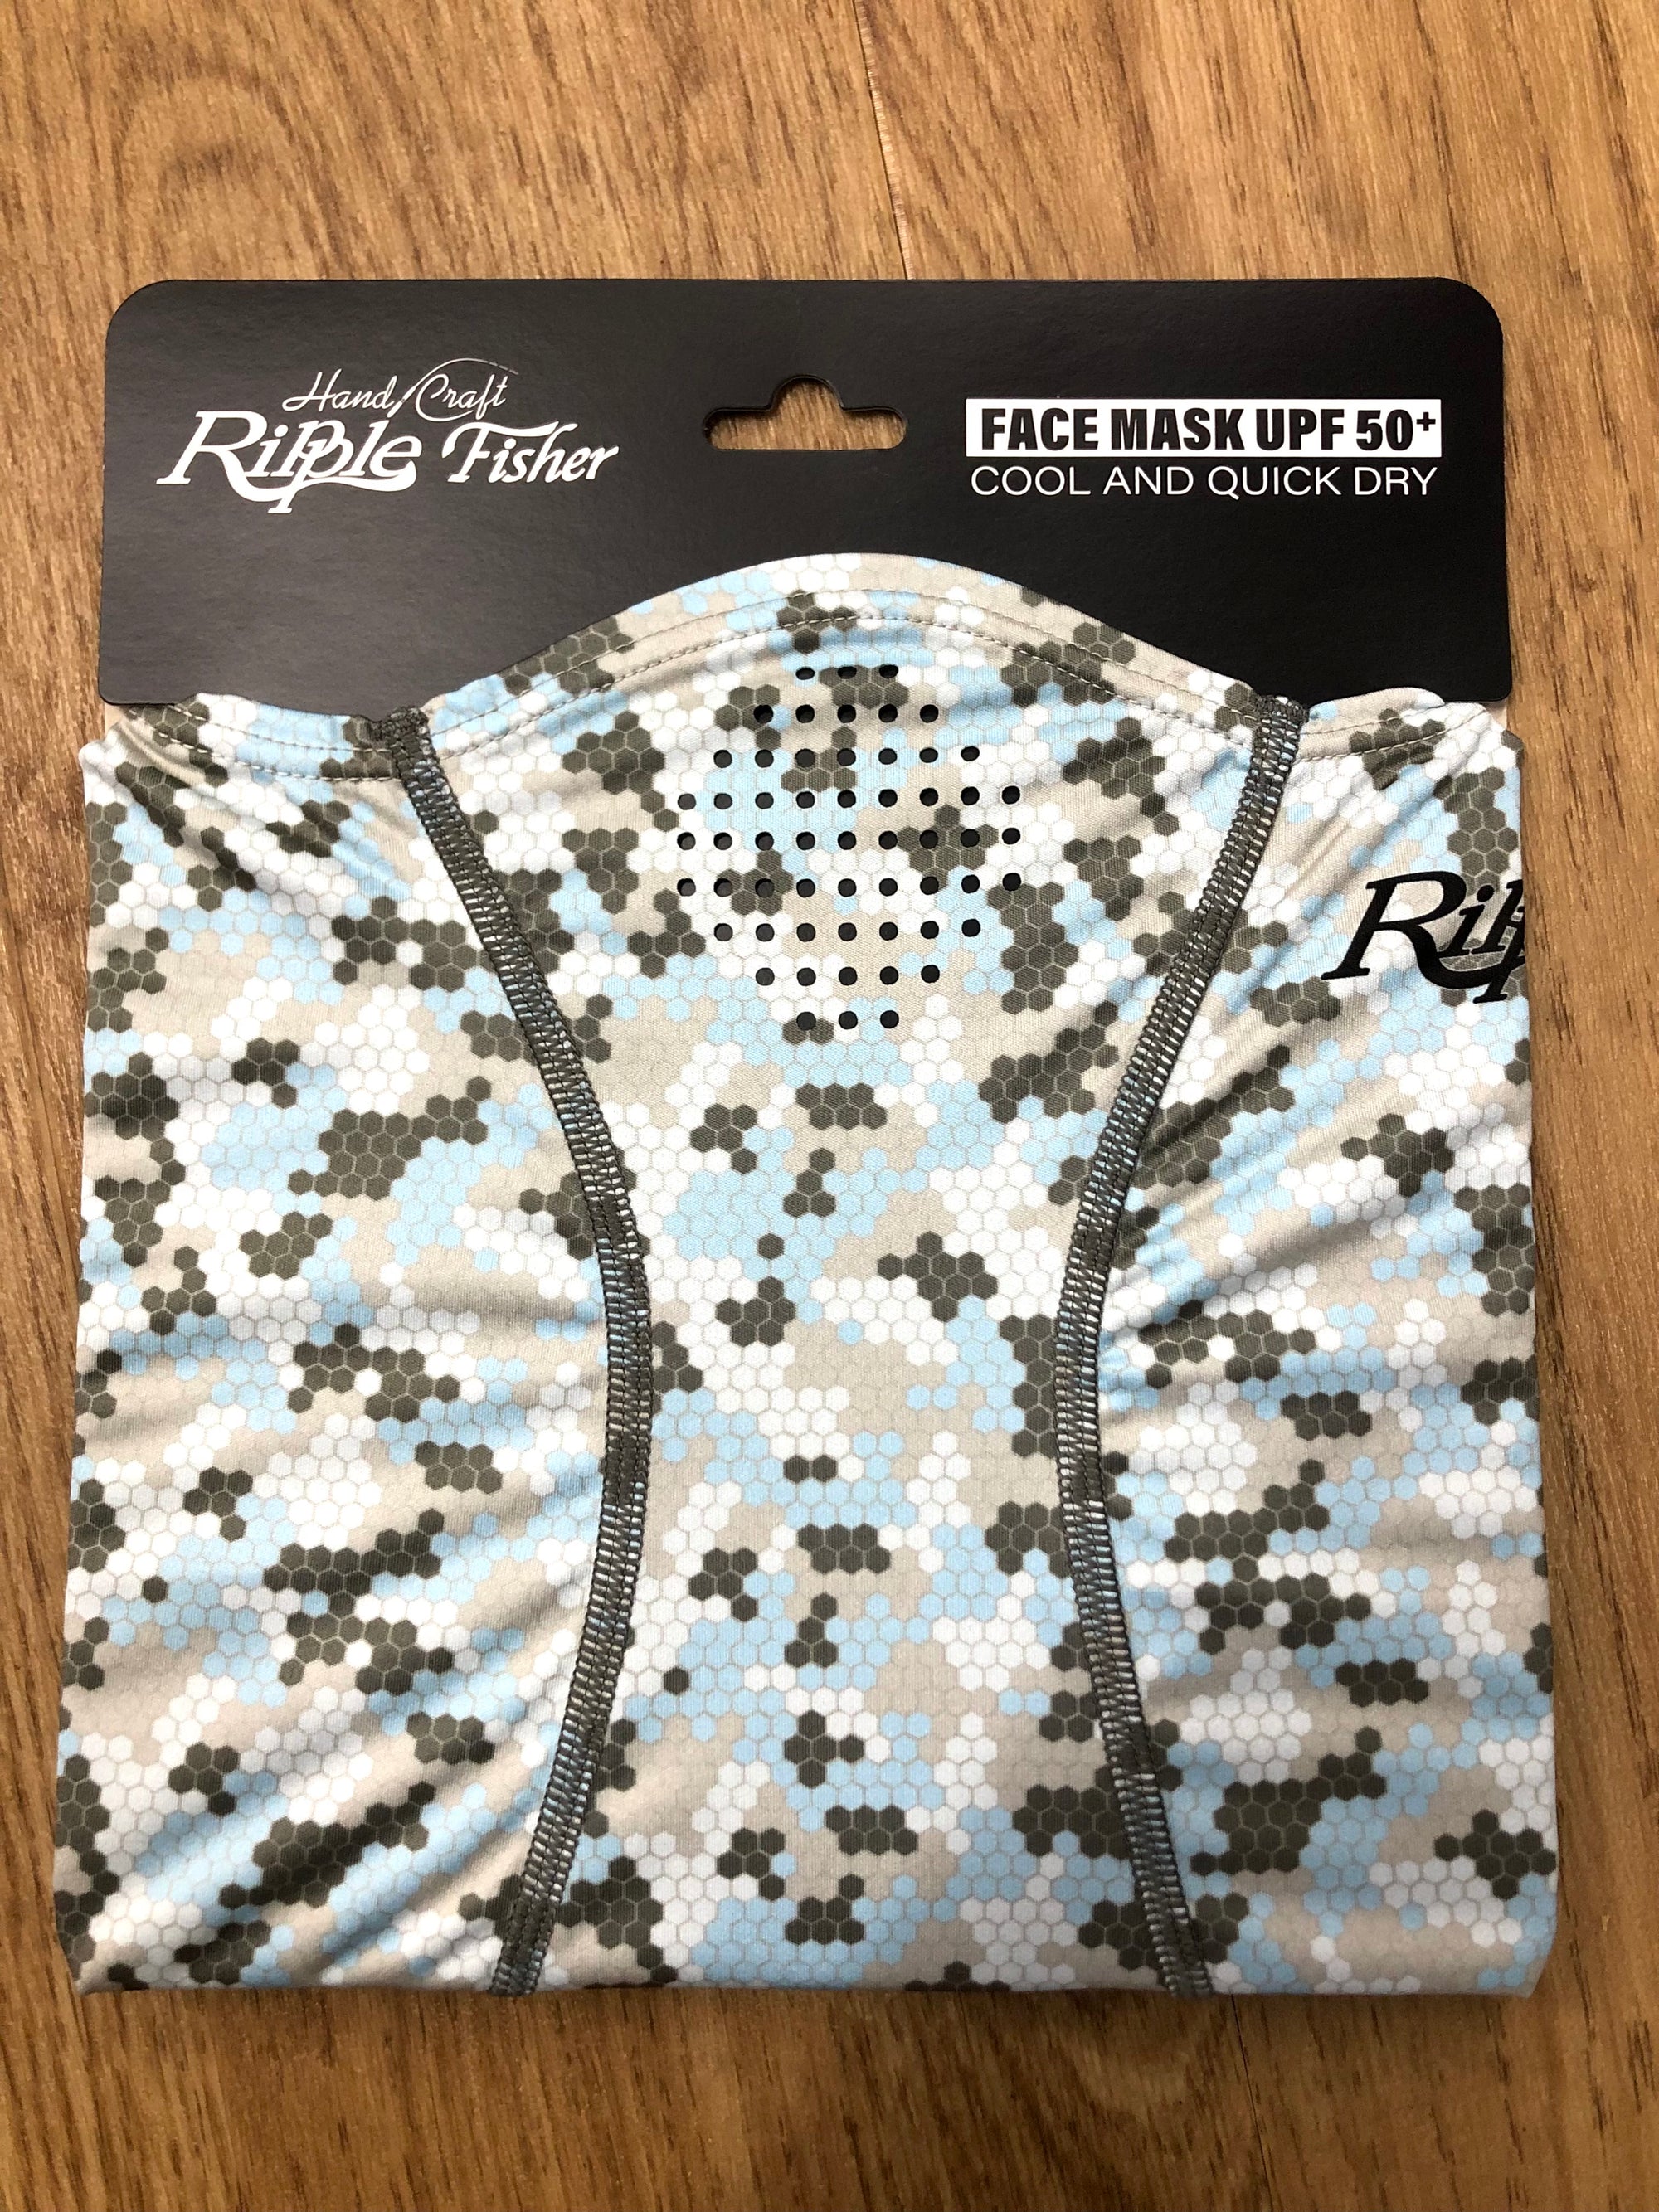 Ripple Fisher Face Mask Buff UPF 50+ Blue Camo Made in Japan